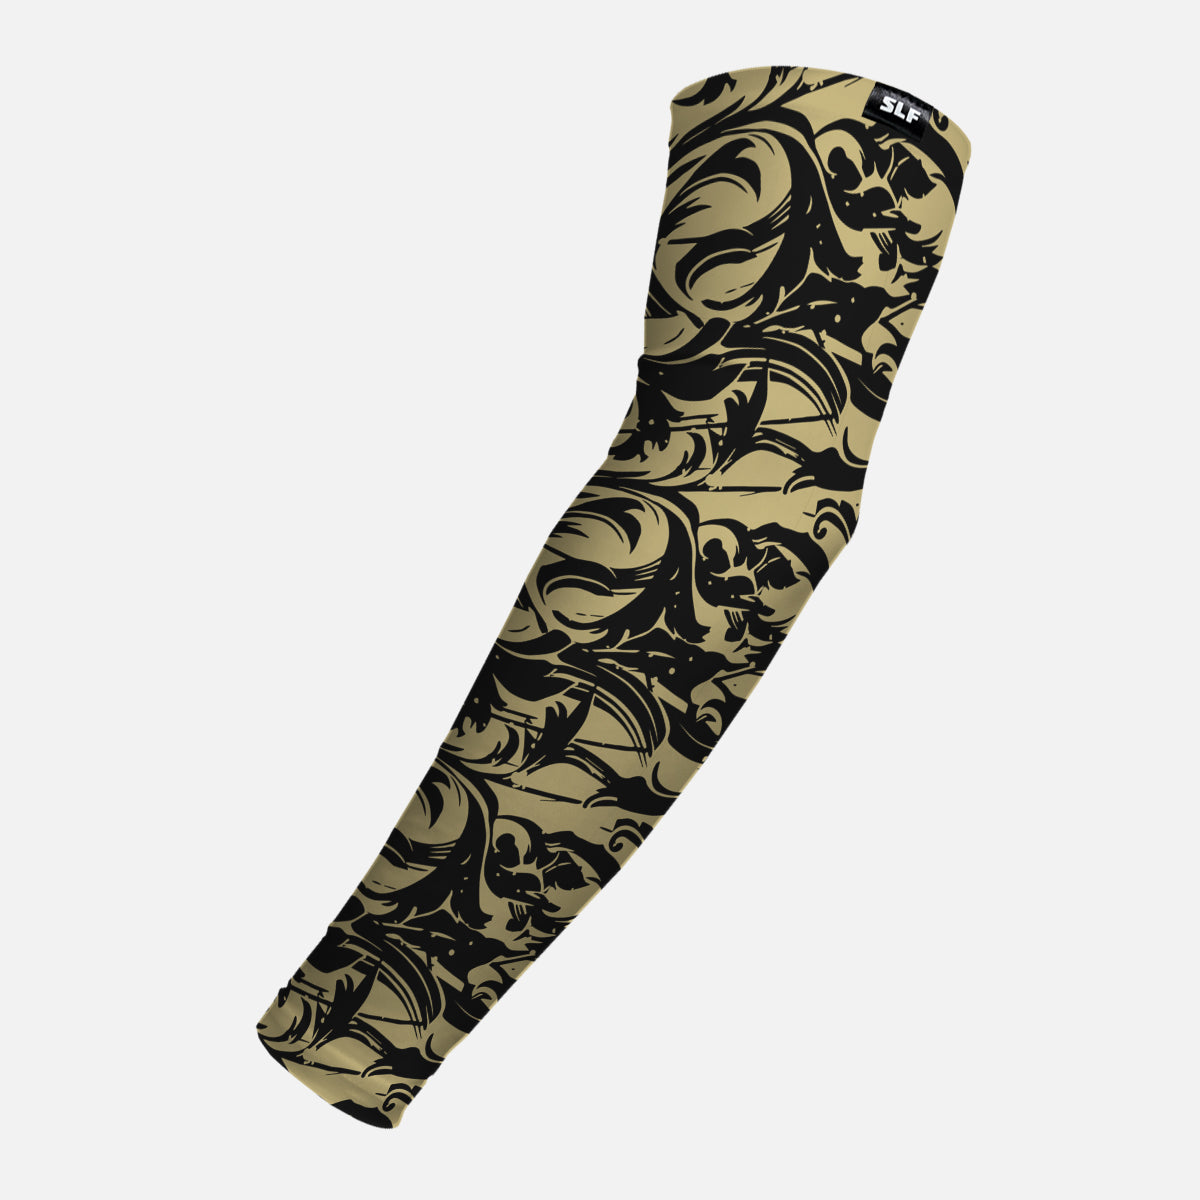 Baroque 2 Old Gold and Black Arm Sleeve